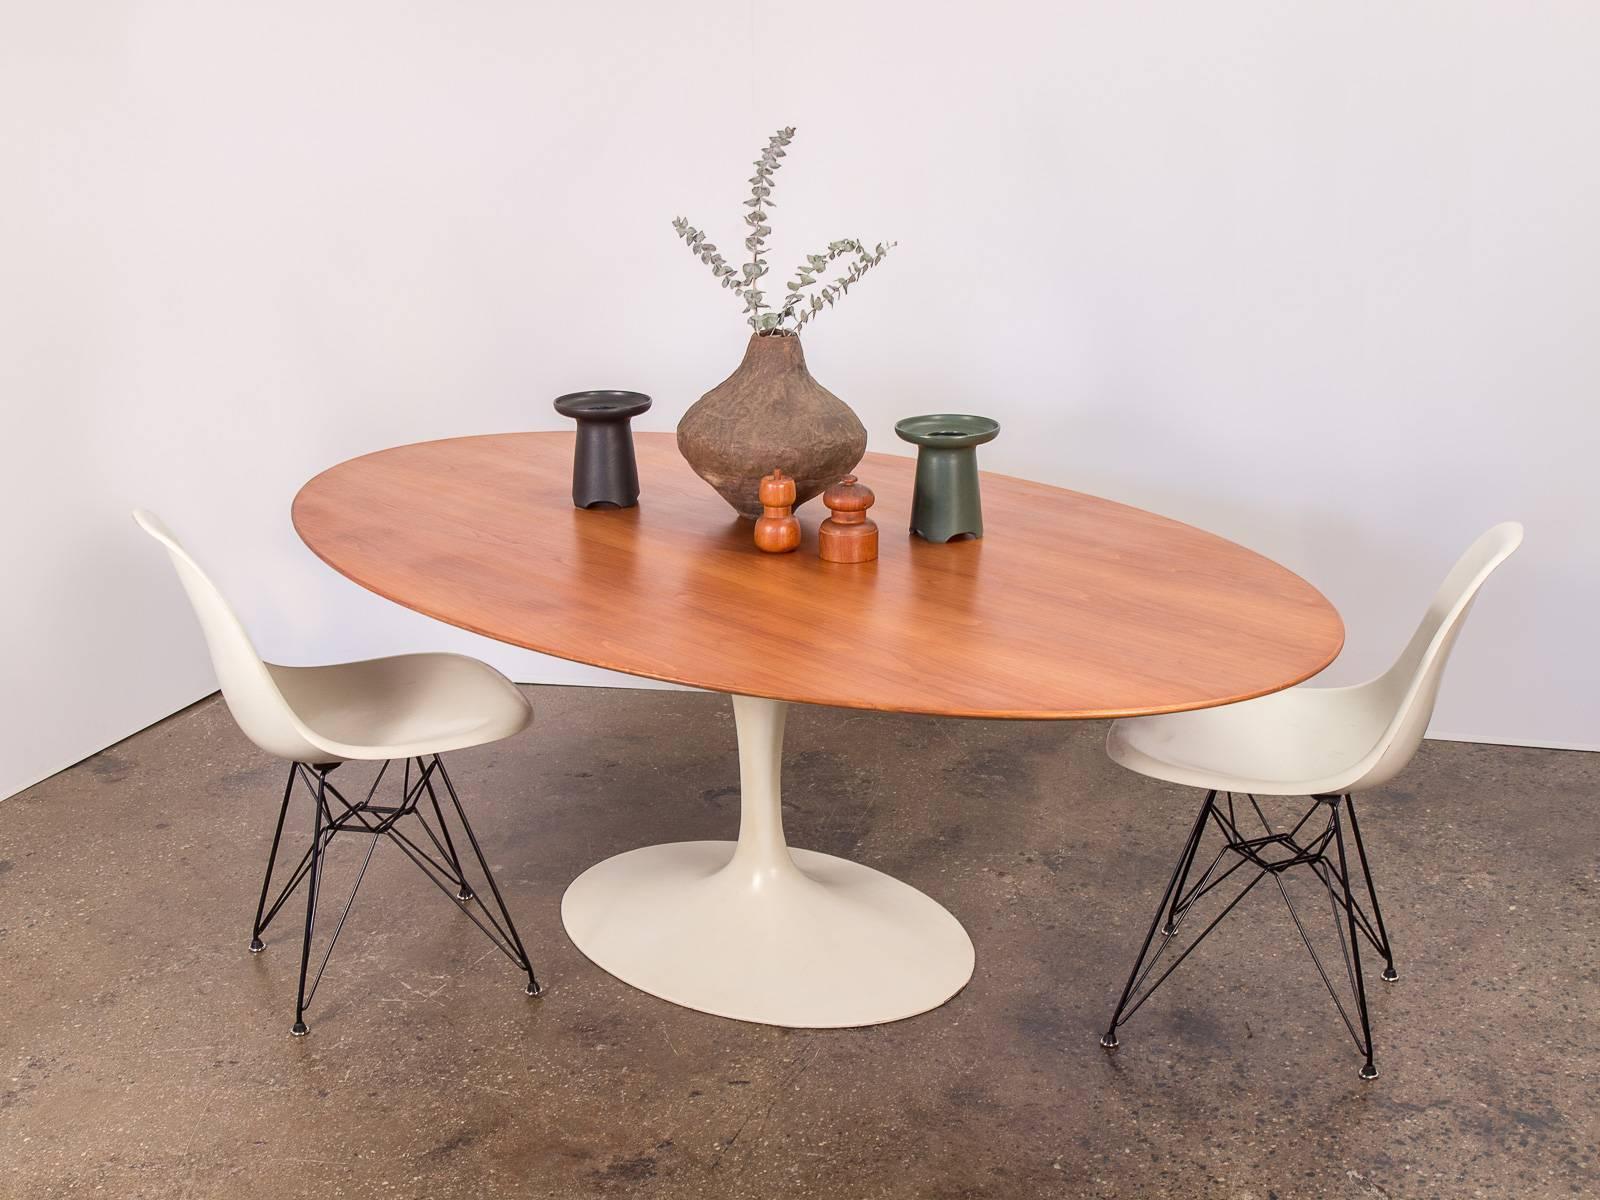 Timeless vintage Eero Saarinen oval dining table in walnut for Knoll Associates Inc. This is a vintage, all original 1950s example. Excellent condition. Impressive, substantial walnut surface has been cleaned, oiled, and polished and is gleaming and